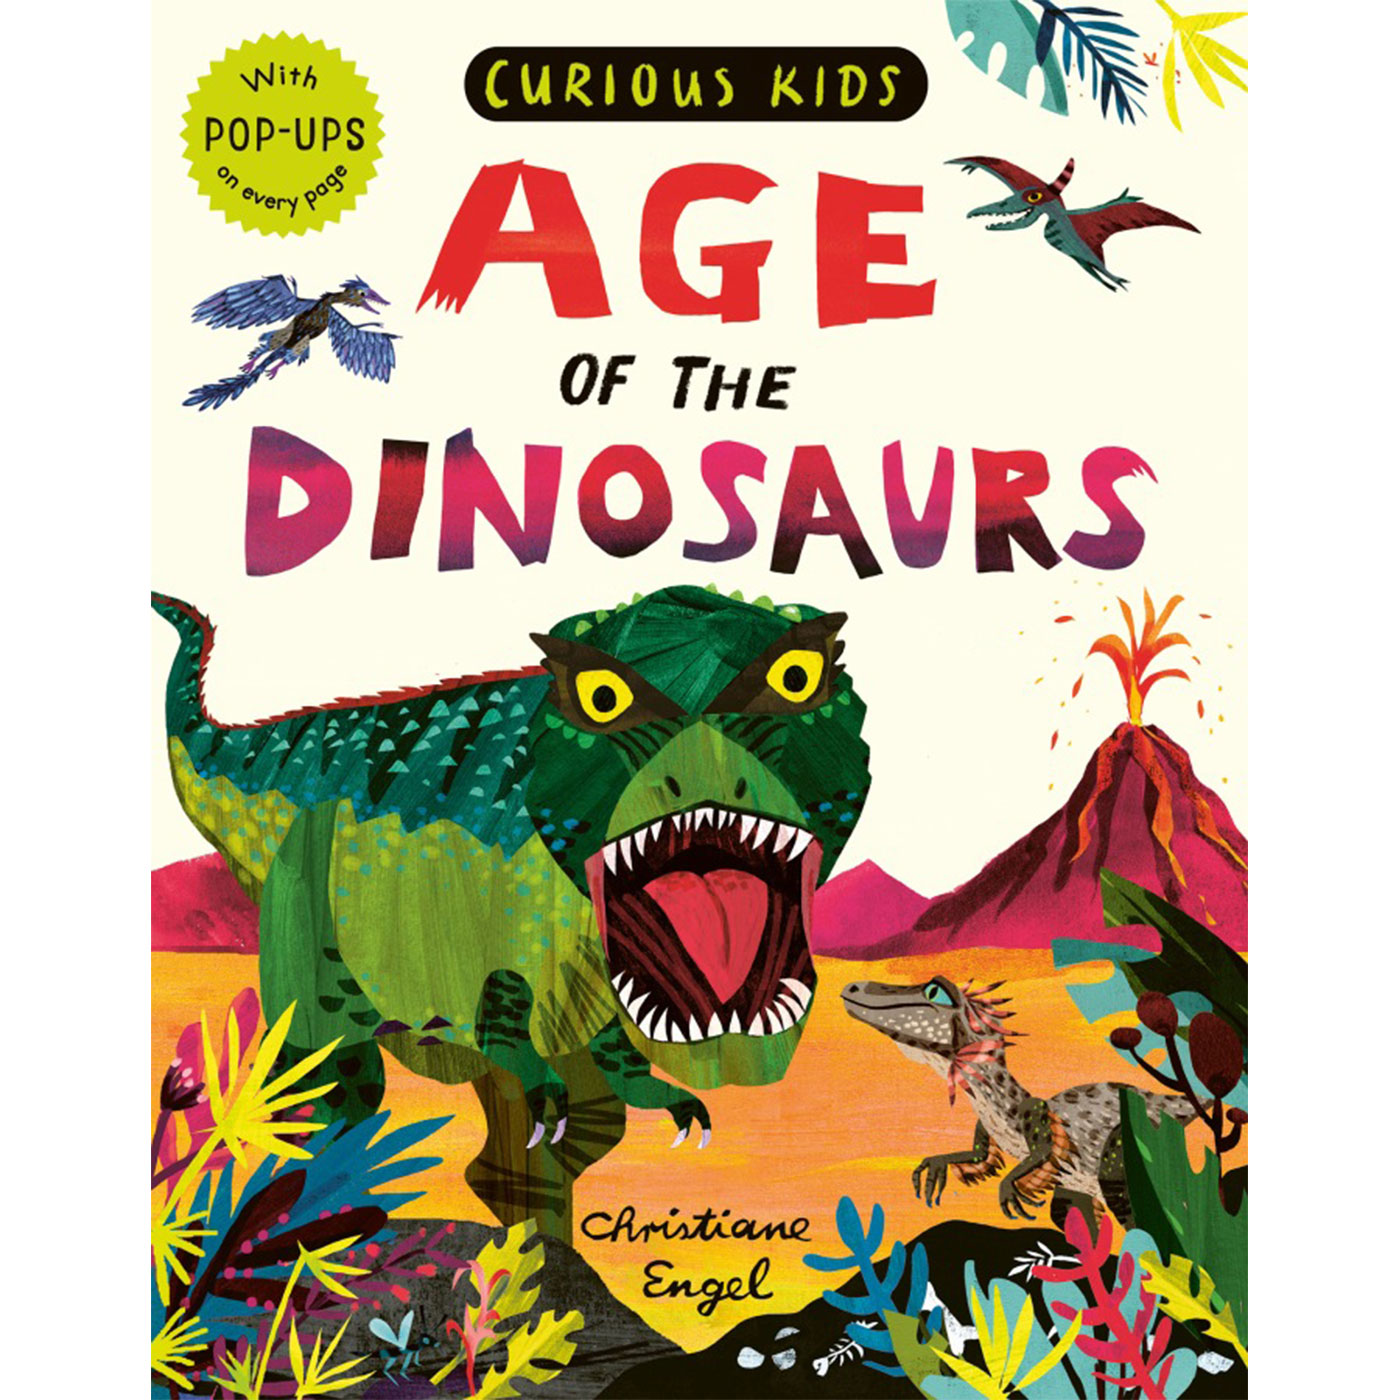  Curious Kids: Age of the Dinosaurs